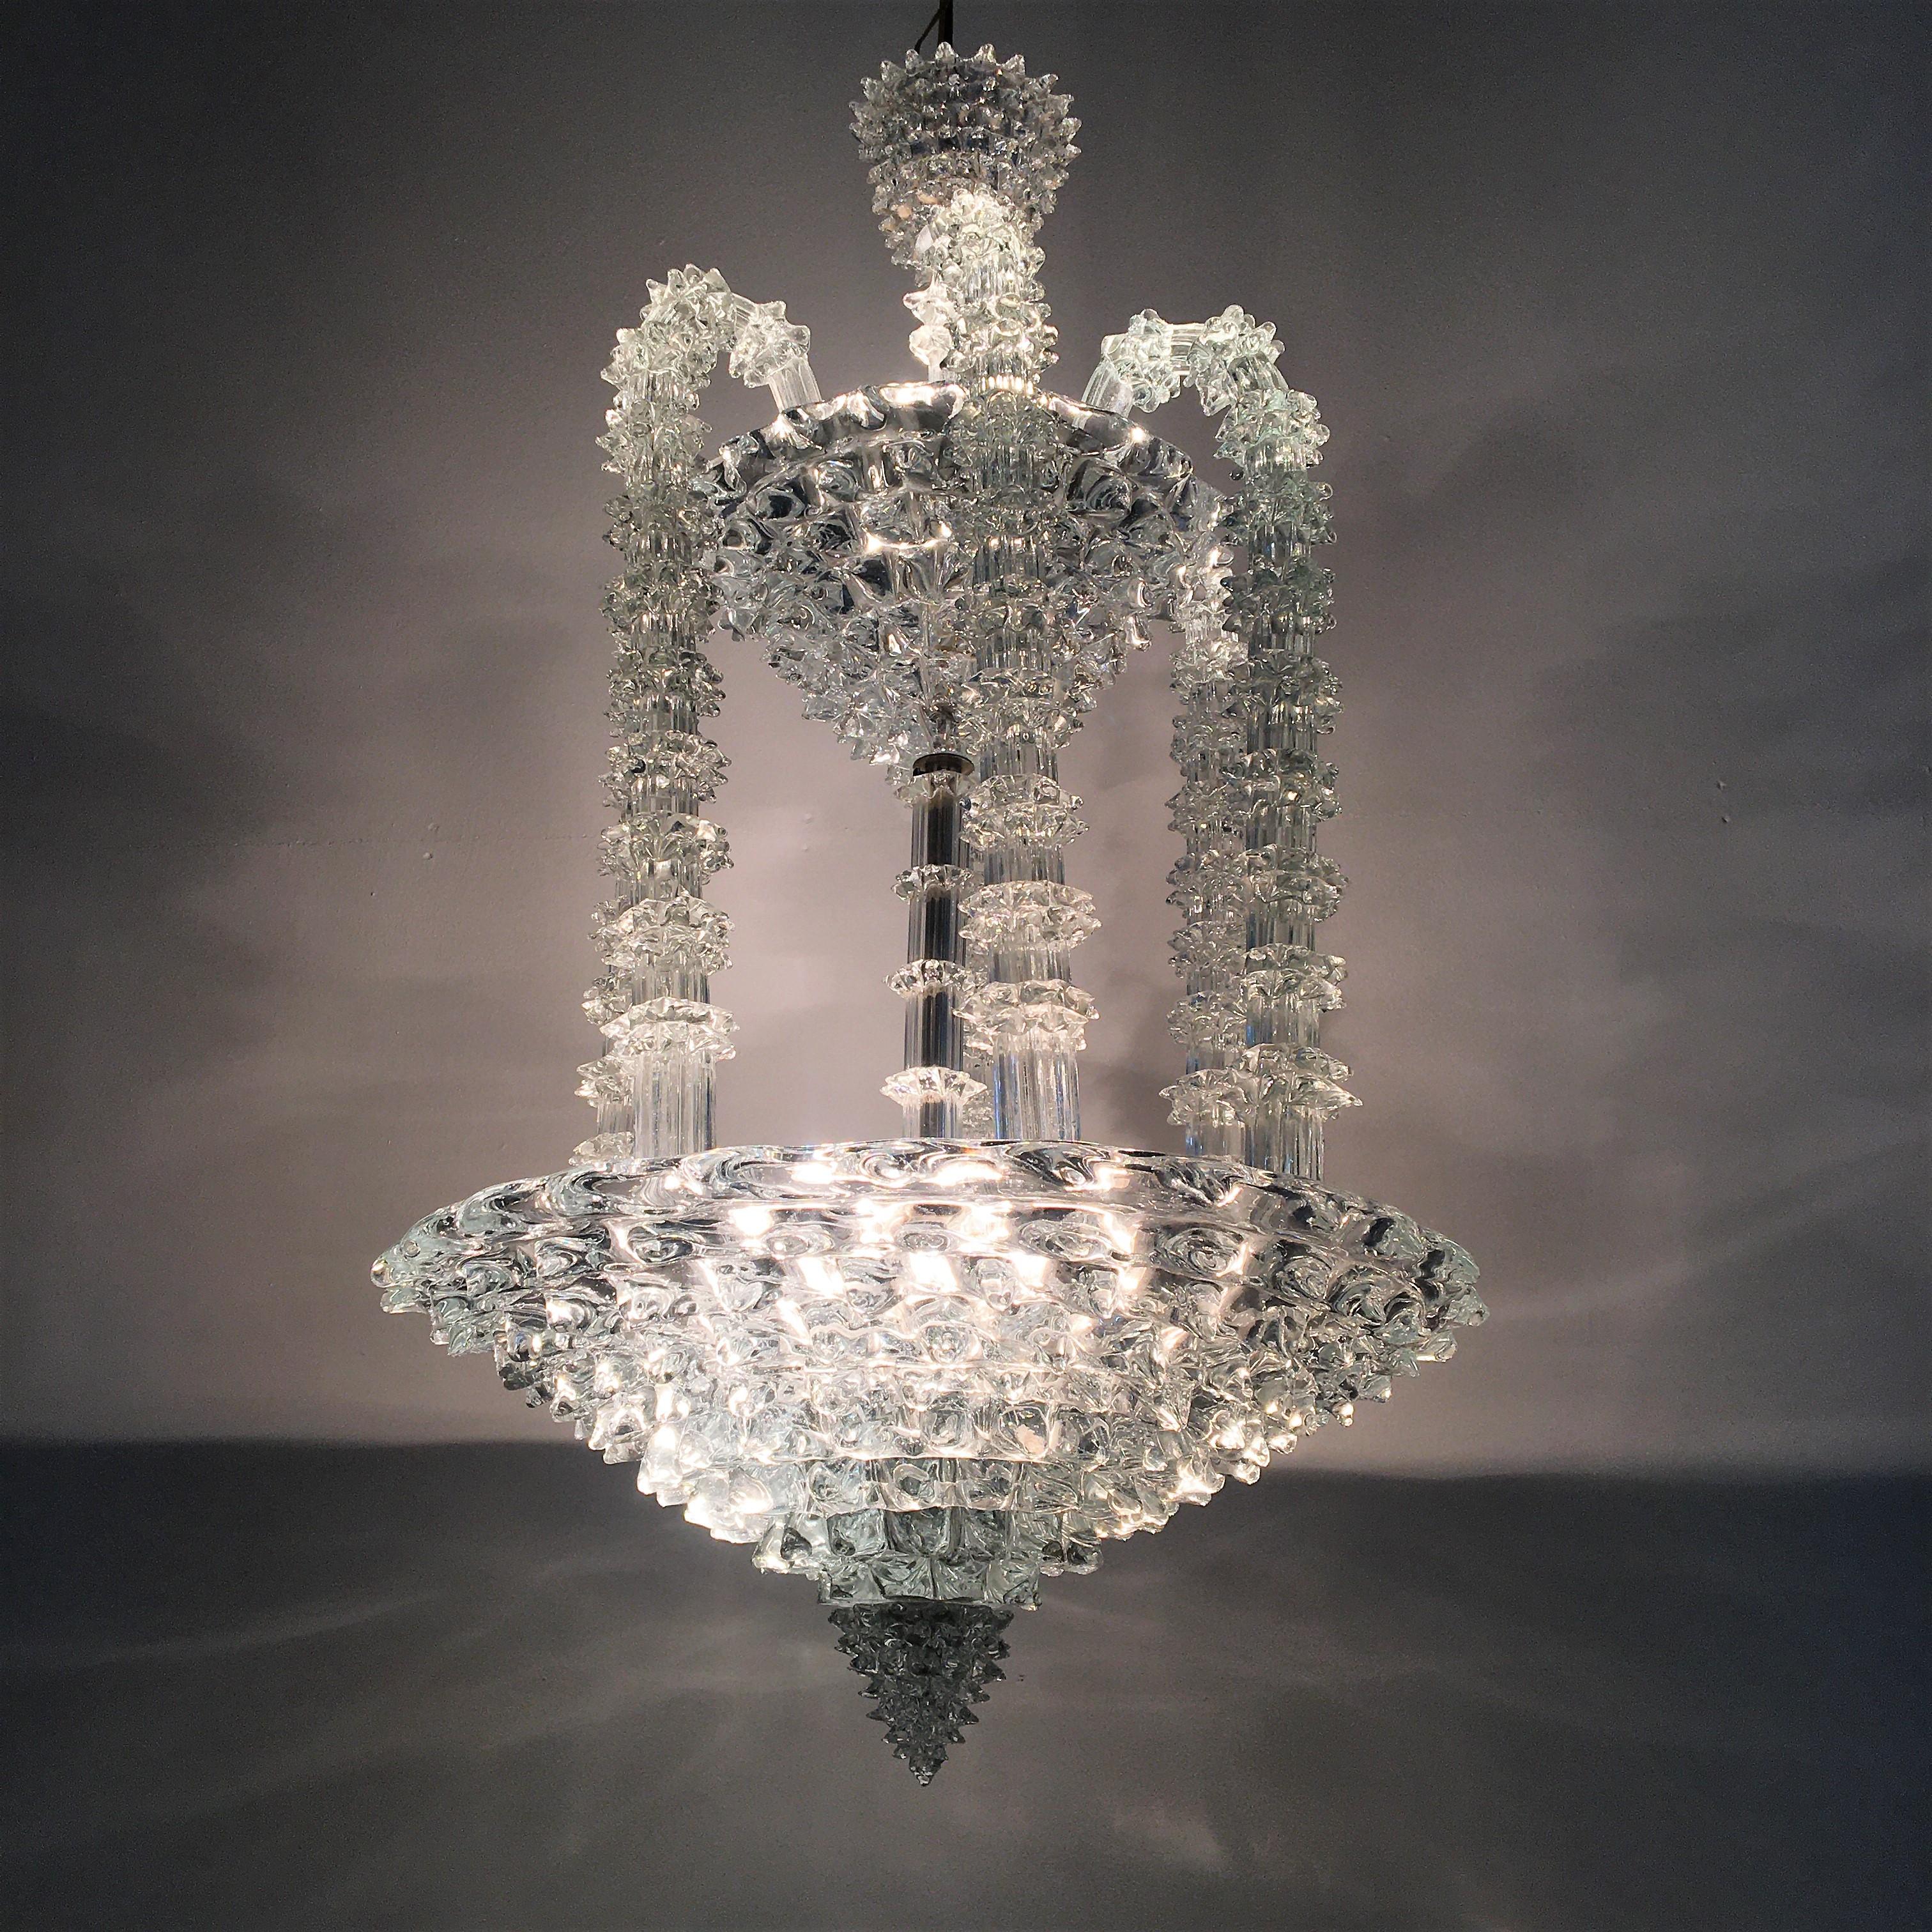 Imposing and rarechandelier in rostrato Murano crystal with nine lights, with two tops in thick glass, and six drop-shaped elements in the shape of a fountain. By Ercole Barovier, Italy in the 1930s.
Wear consistent with age and use. 

There is a